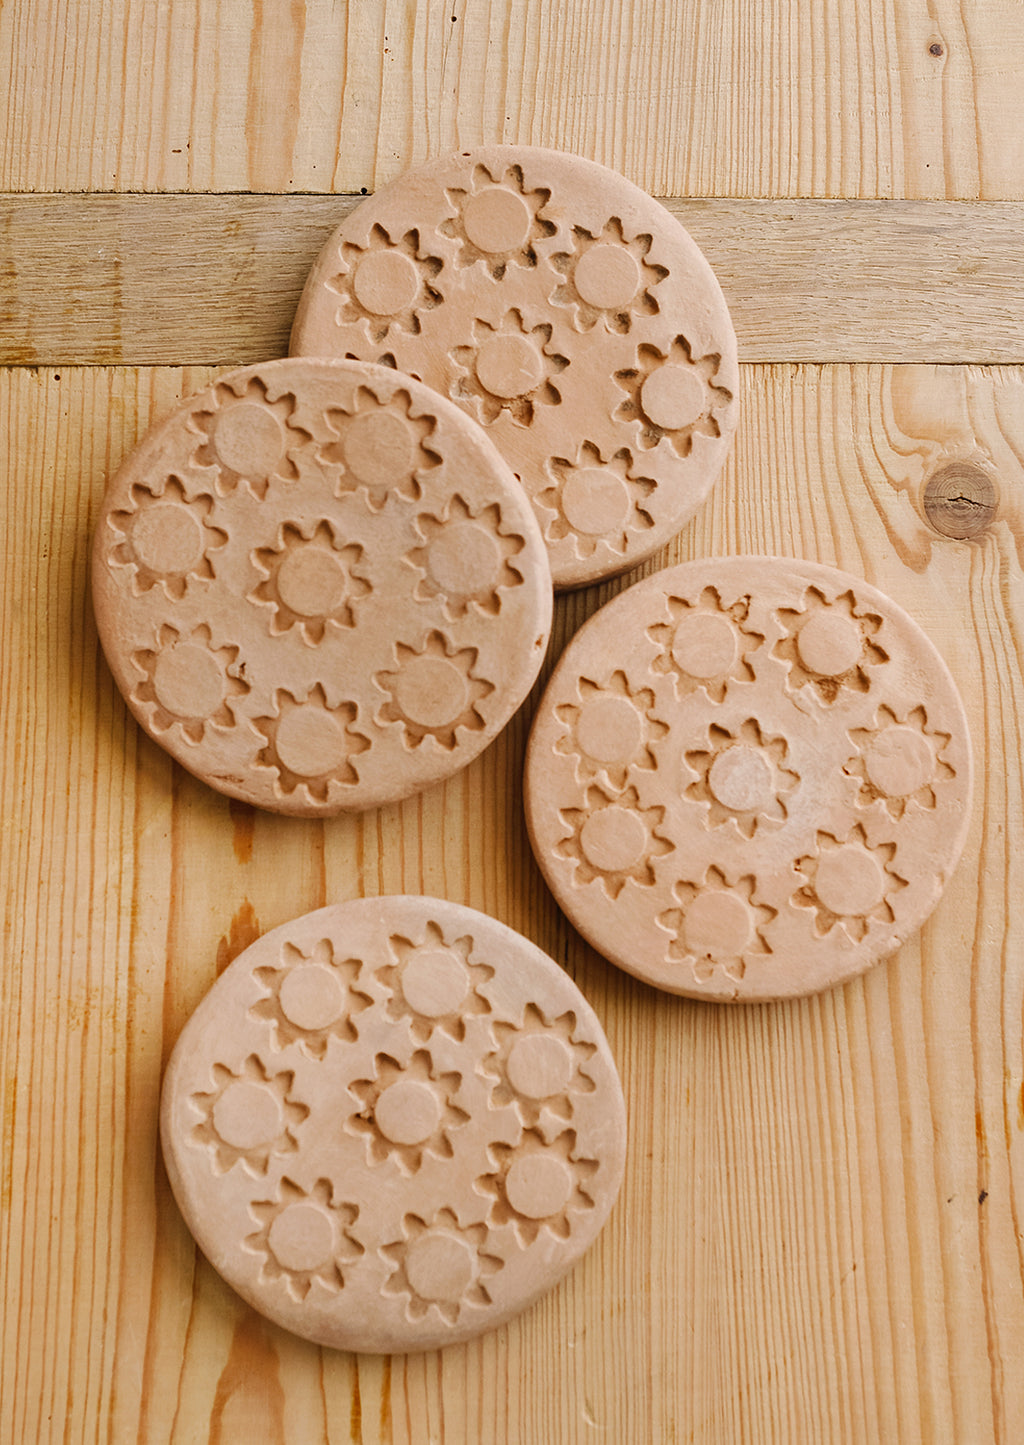 1: A set of round terracotta coasters with stamped sun pattern.